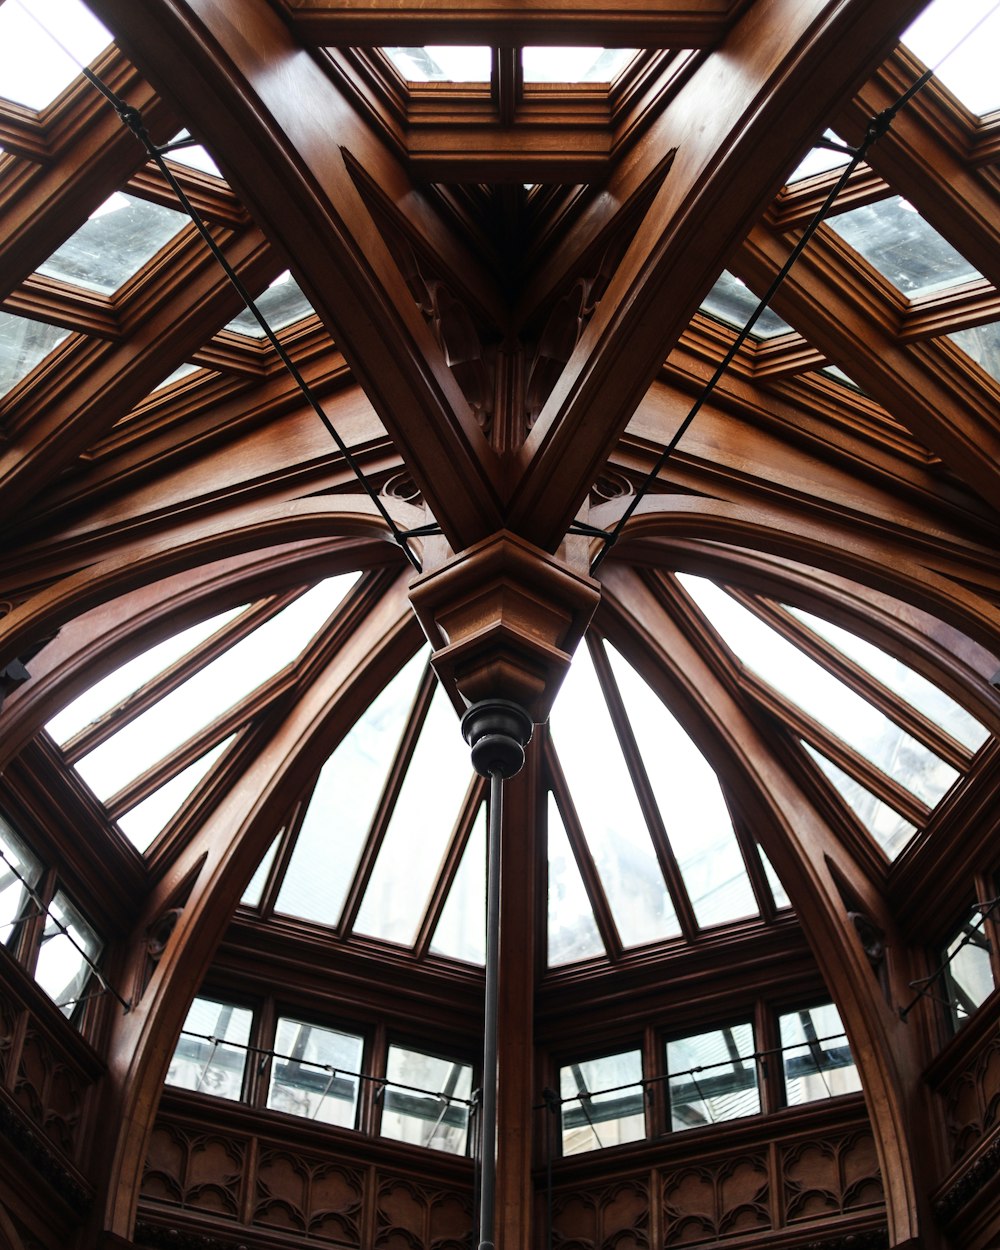 a large wooden ceiling with many windows